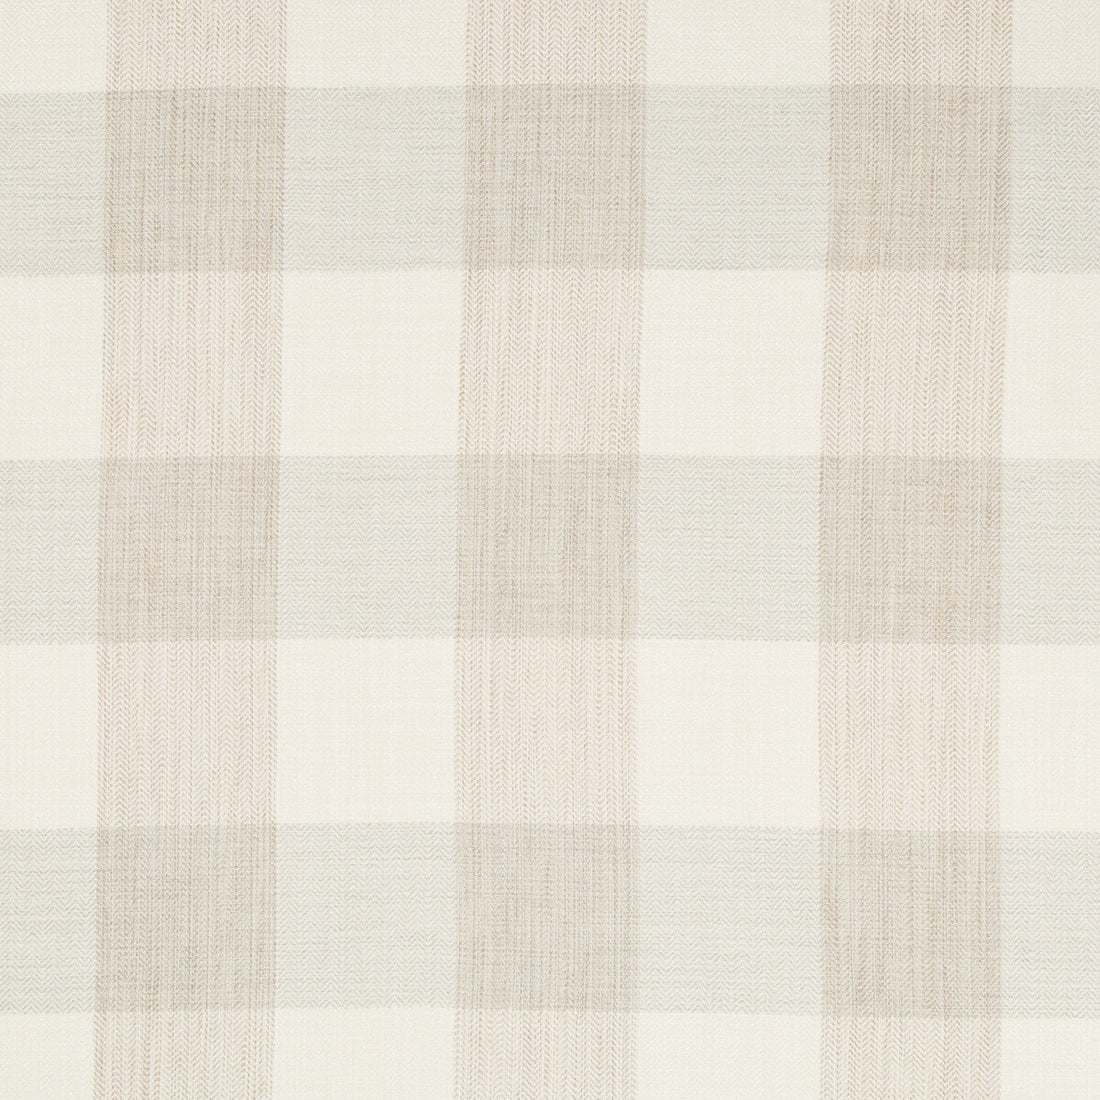 Barnsdale fabric in linen color - pattern 35306.16.0 - by Kravet Basics in the Greenwich collection